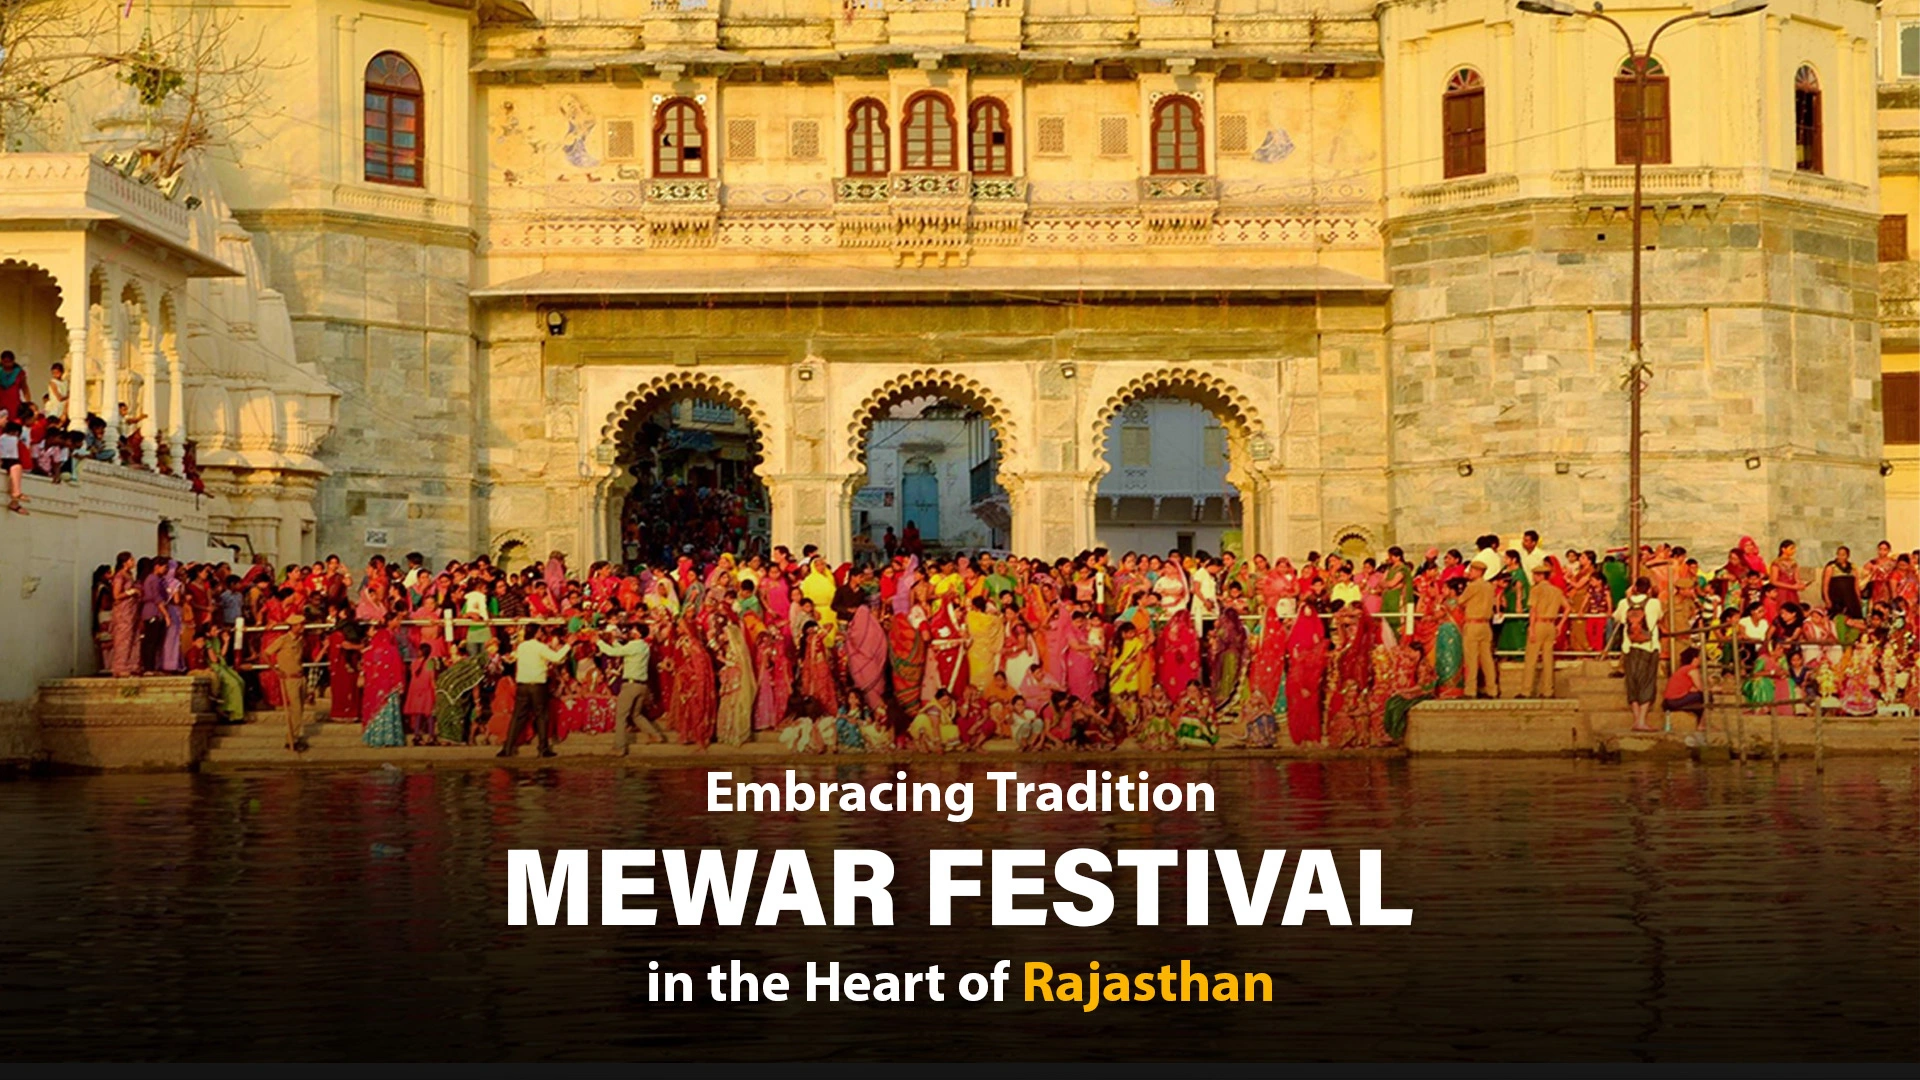 Embracing Tradition: Mewar Festival in the Heart of Rajasthan